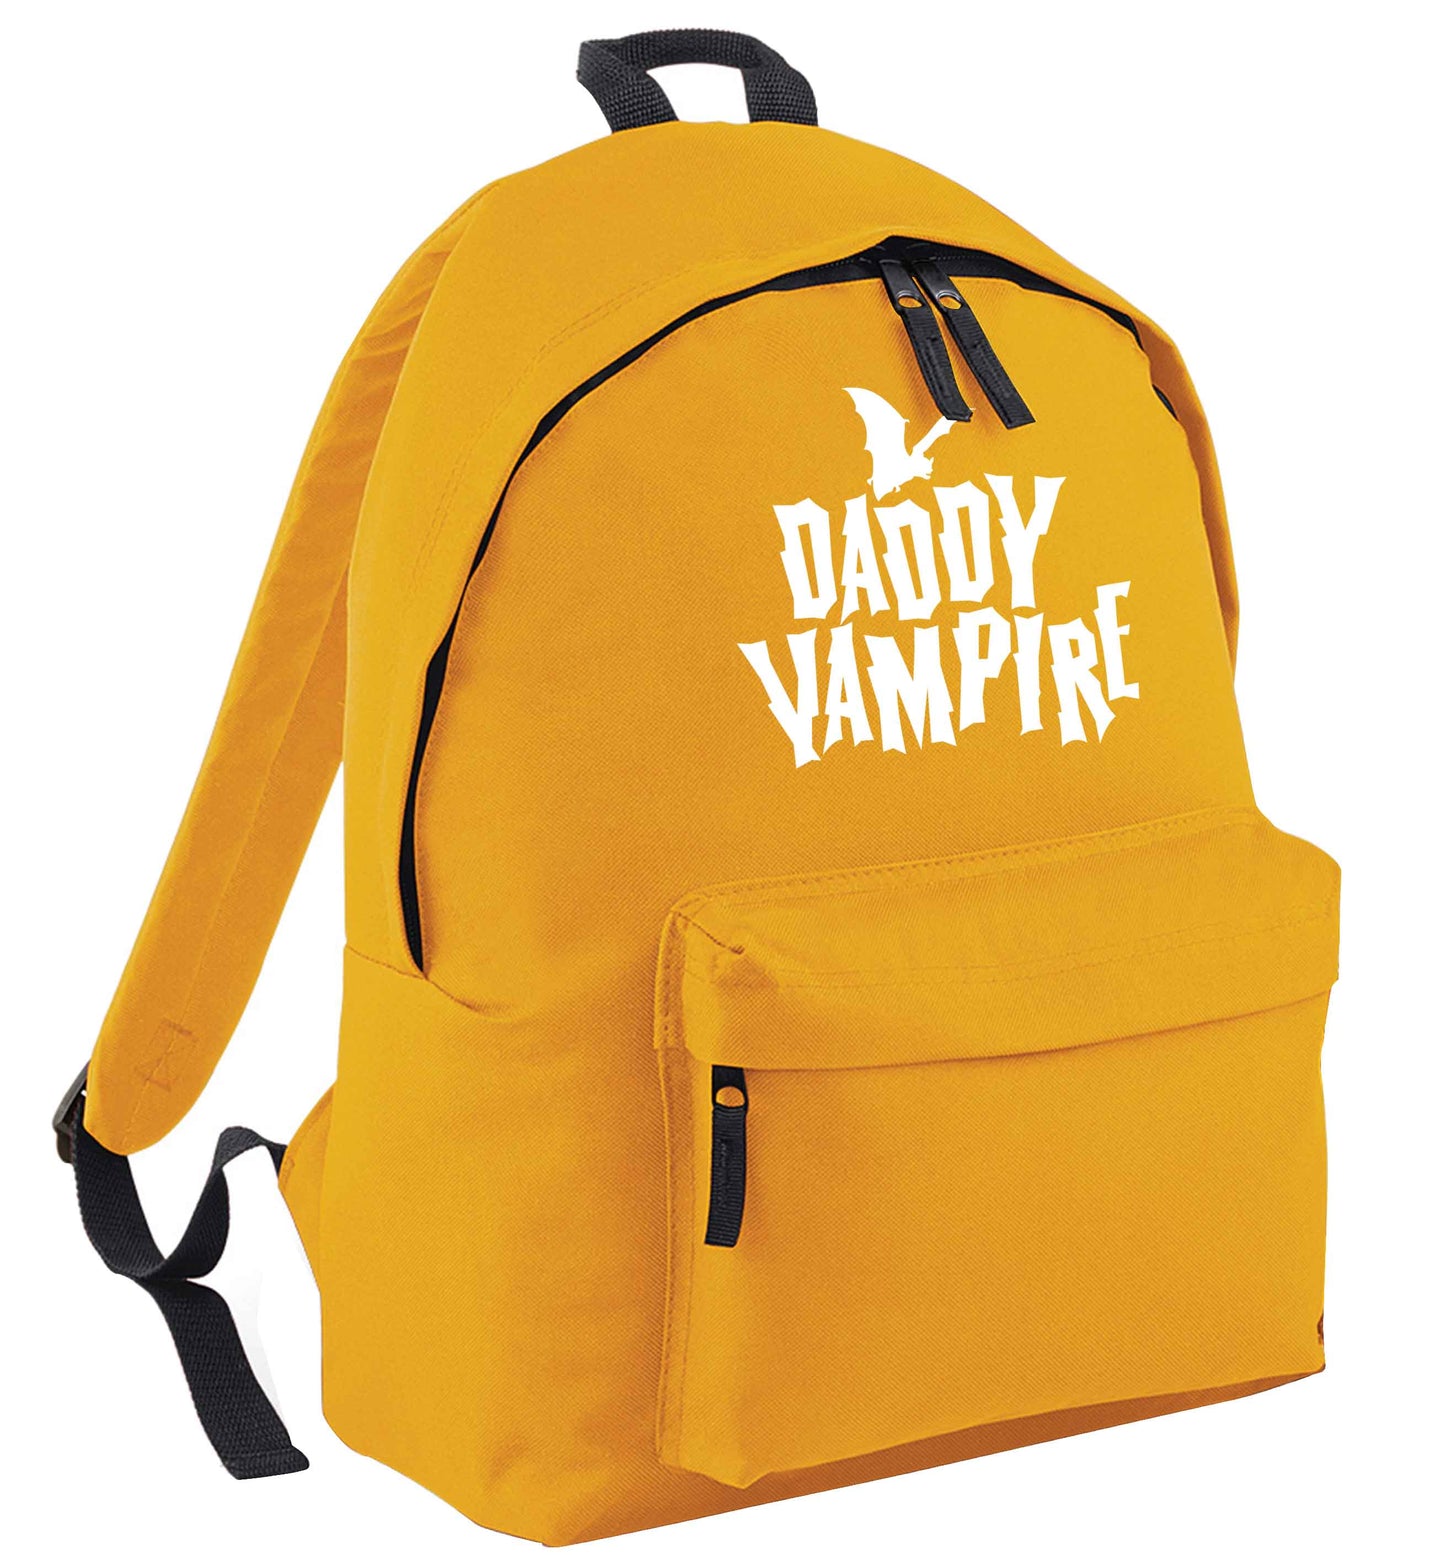 Daddy vampire mustard adults backpack